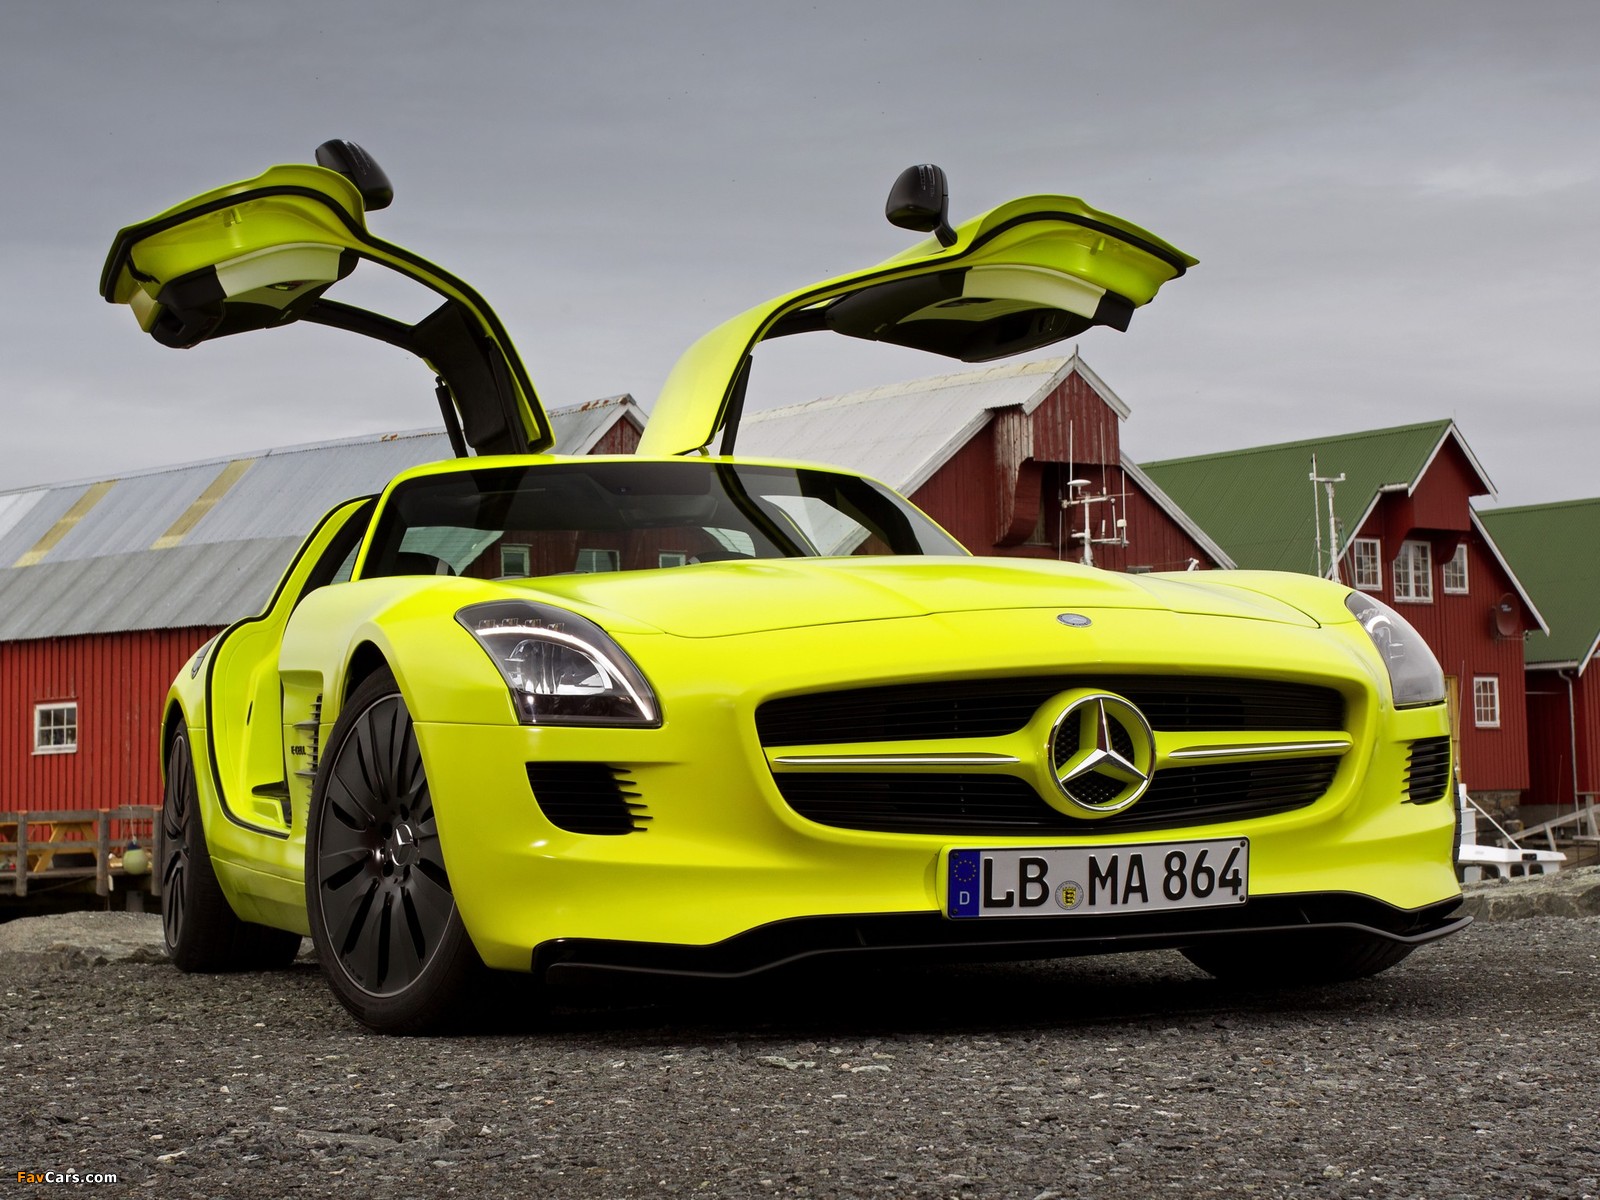 Mercedes-Benz SLS 63 AMG E-Cell Prototype (C197) 2010 pictures (1600 x 1200)